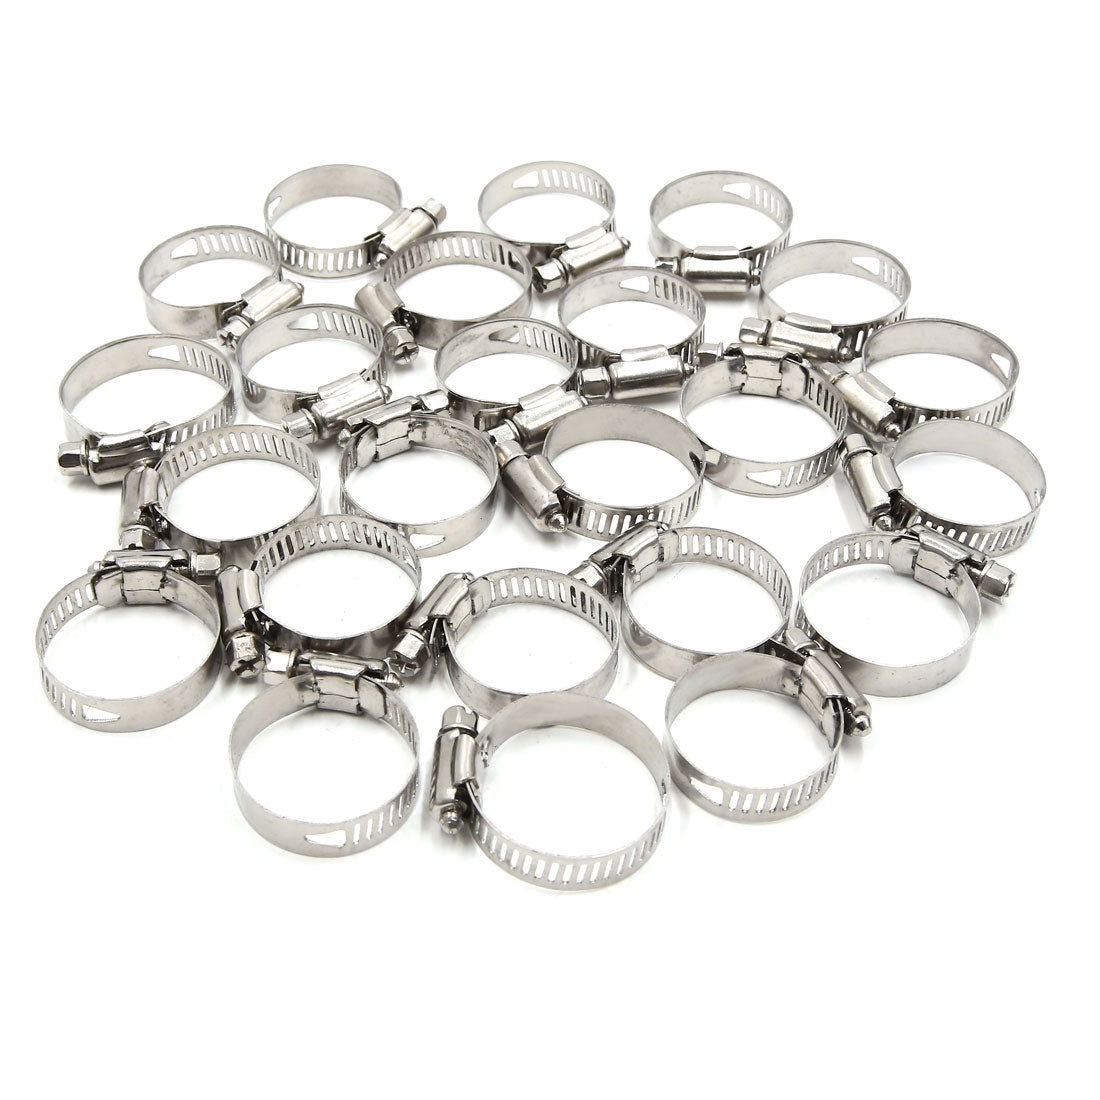 uxcell Uxcell 24pcs 18-32MM Stainless Steel Car Vehicle Drive Hose Clamp Fuel Line  Clip